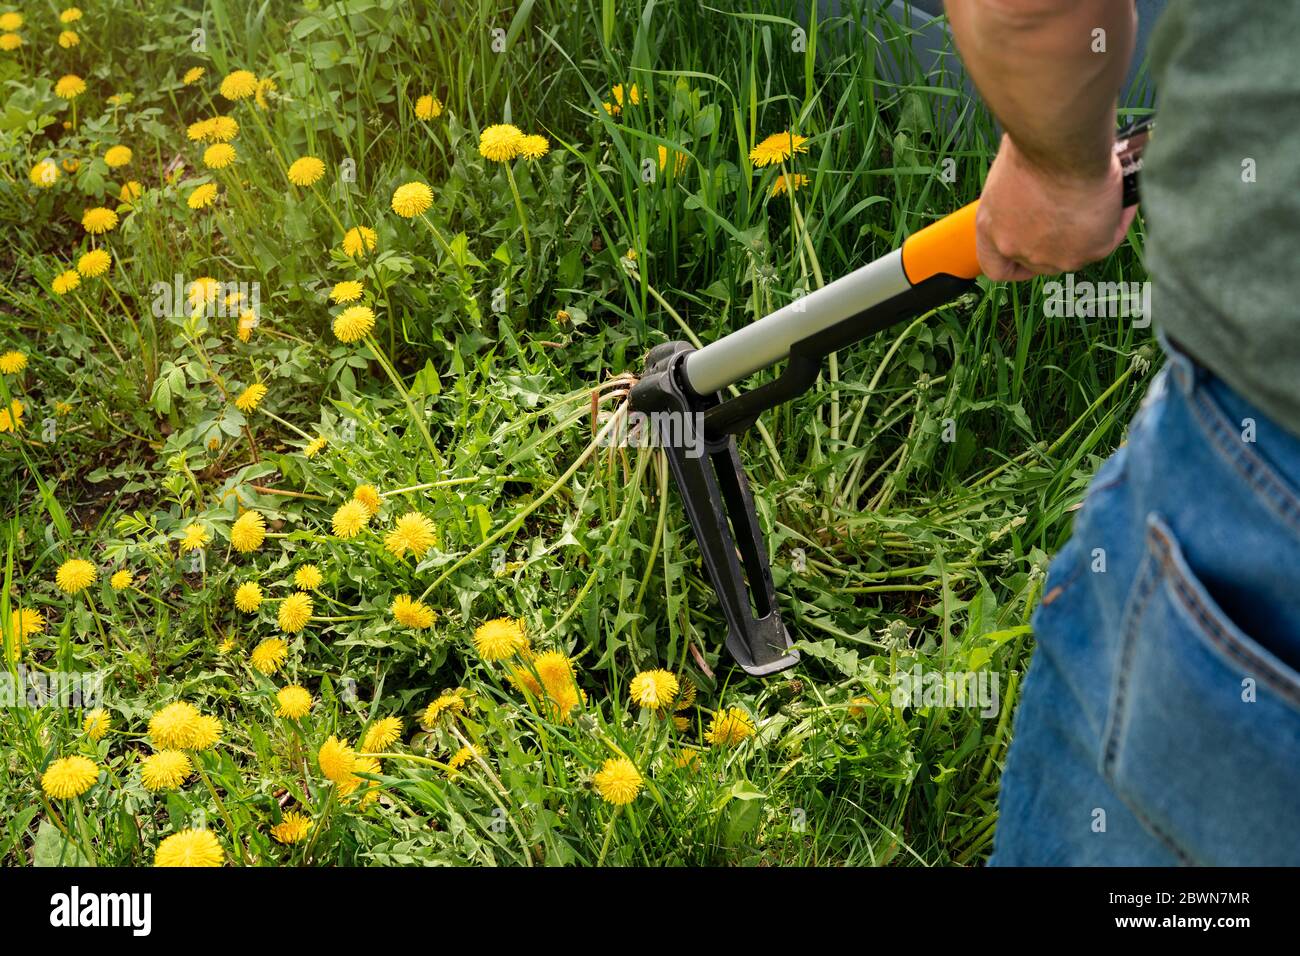 Gardener removing weeds from yard. Device for removing dandelion weeds by pulling the tap root. Weed control. Dandelion removal and weeder lawn tool. Stock Photo